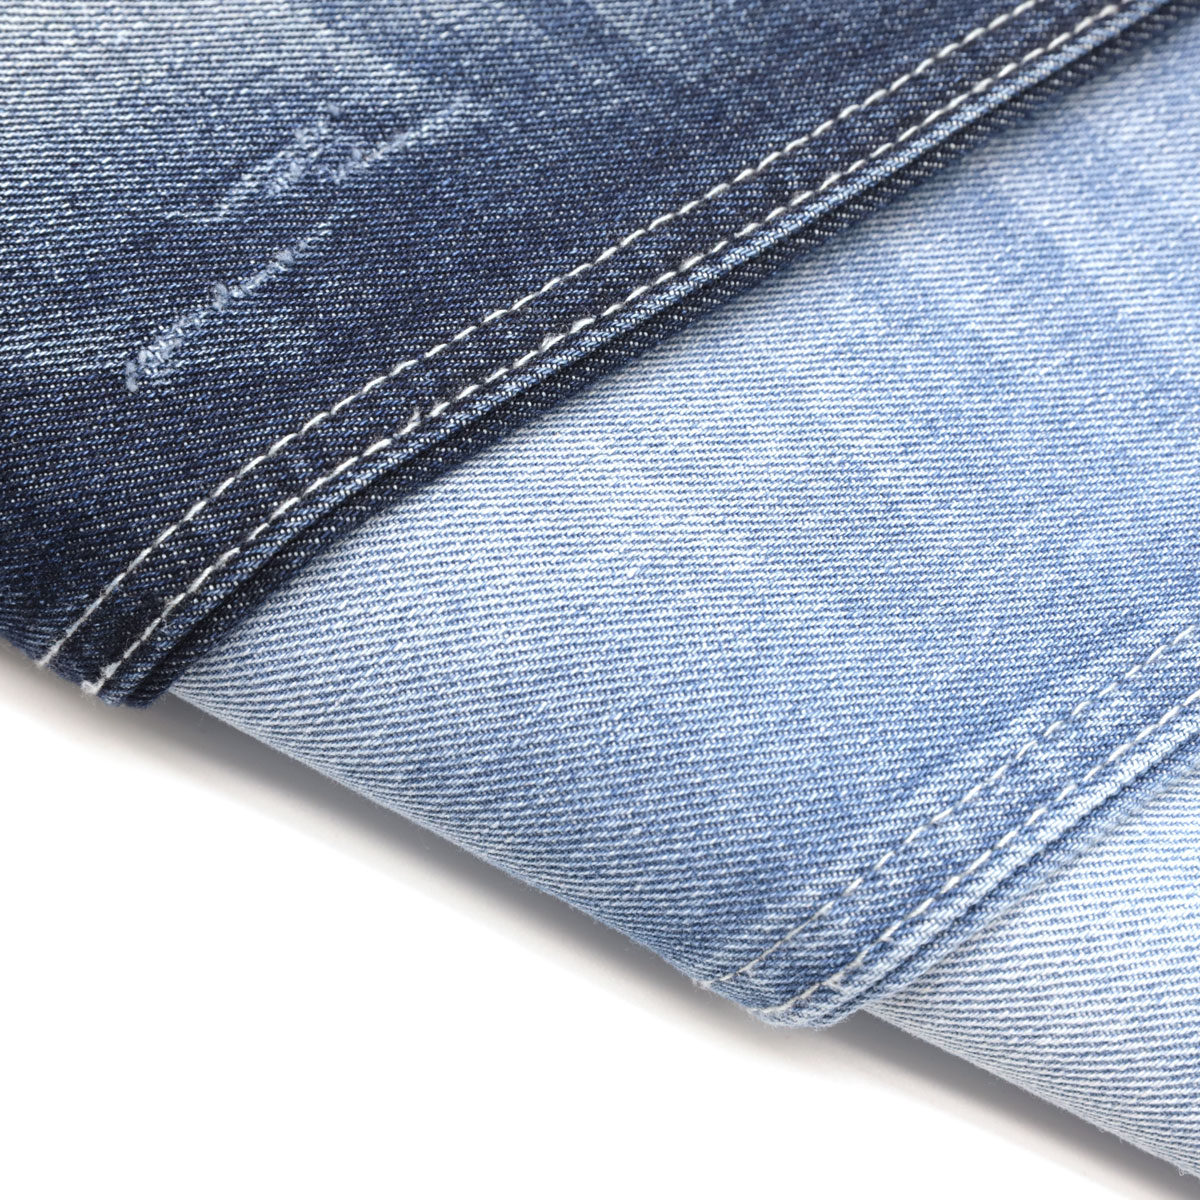 Denim Fabric: What Are the Features? 2